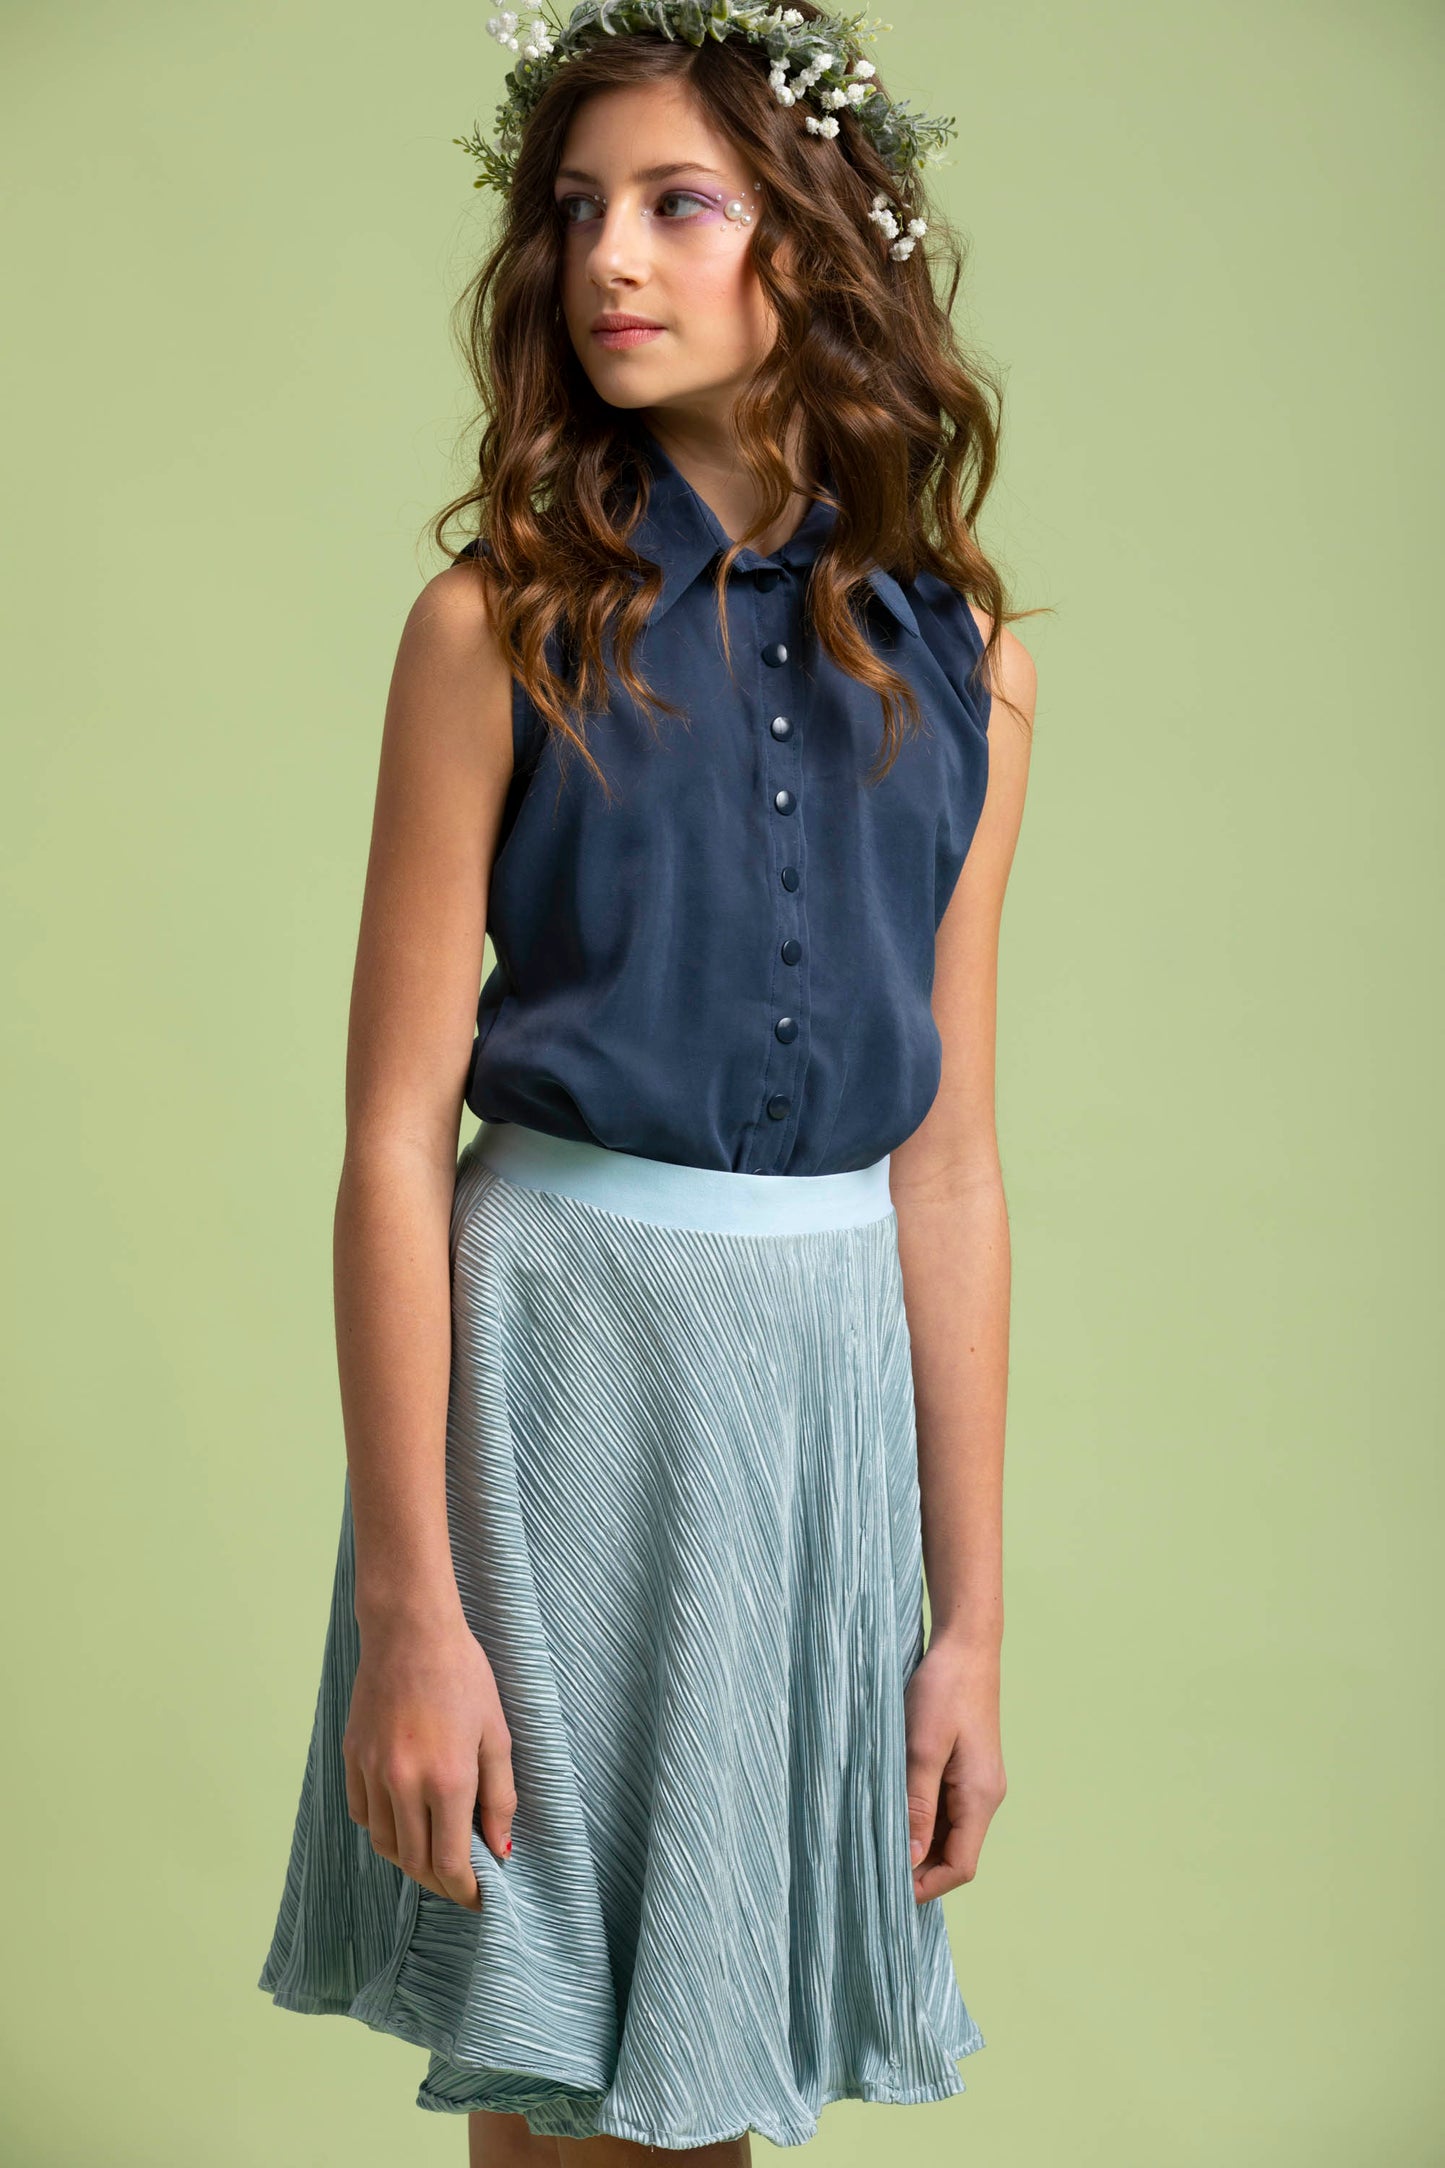 A mid body shot shows us the young girls carmen top paired with her blue crinkle Mercedes Skirt